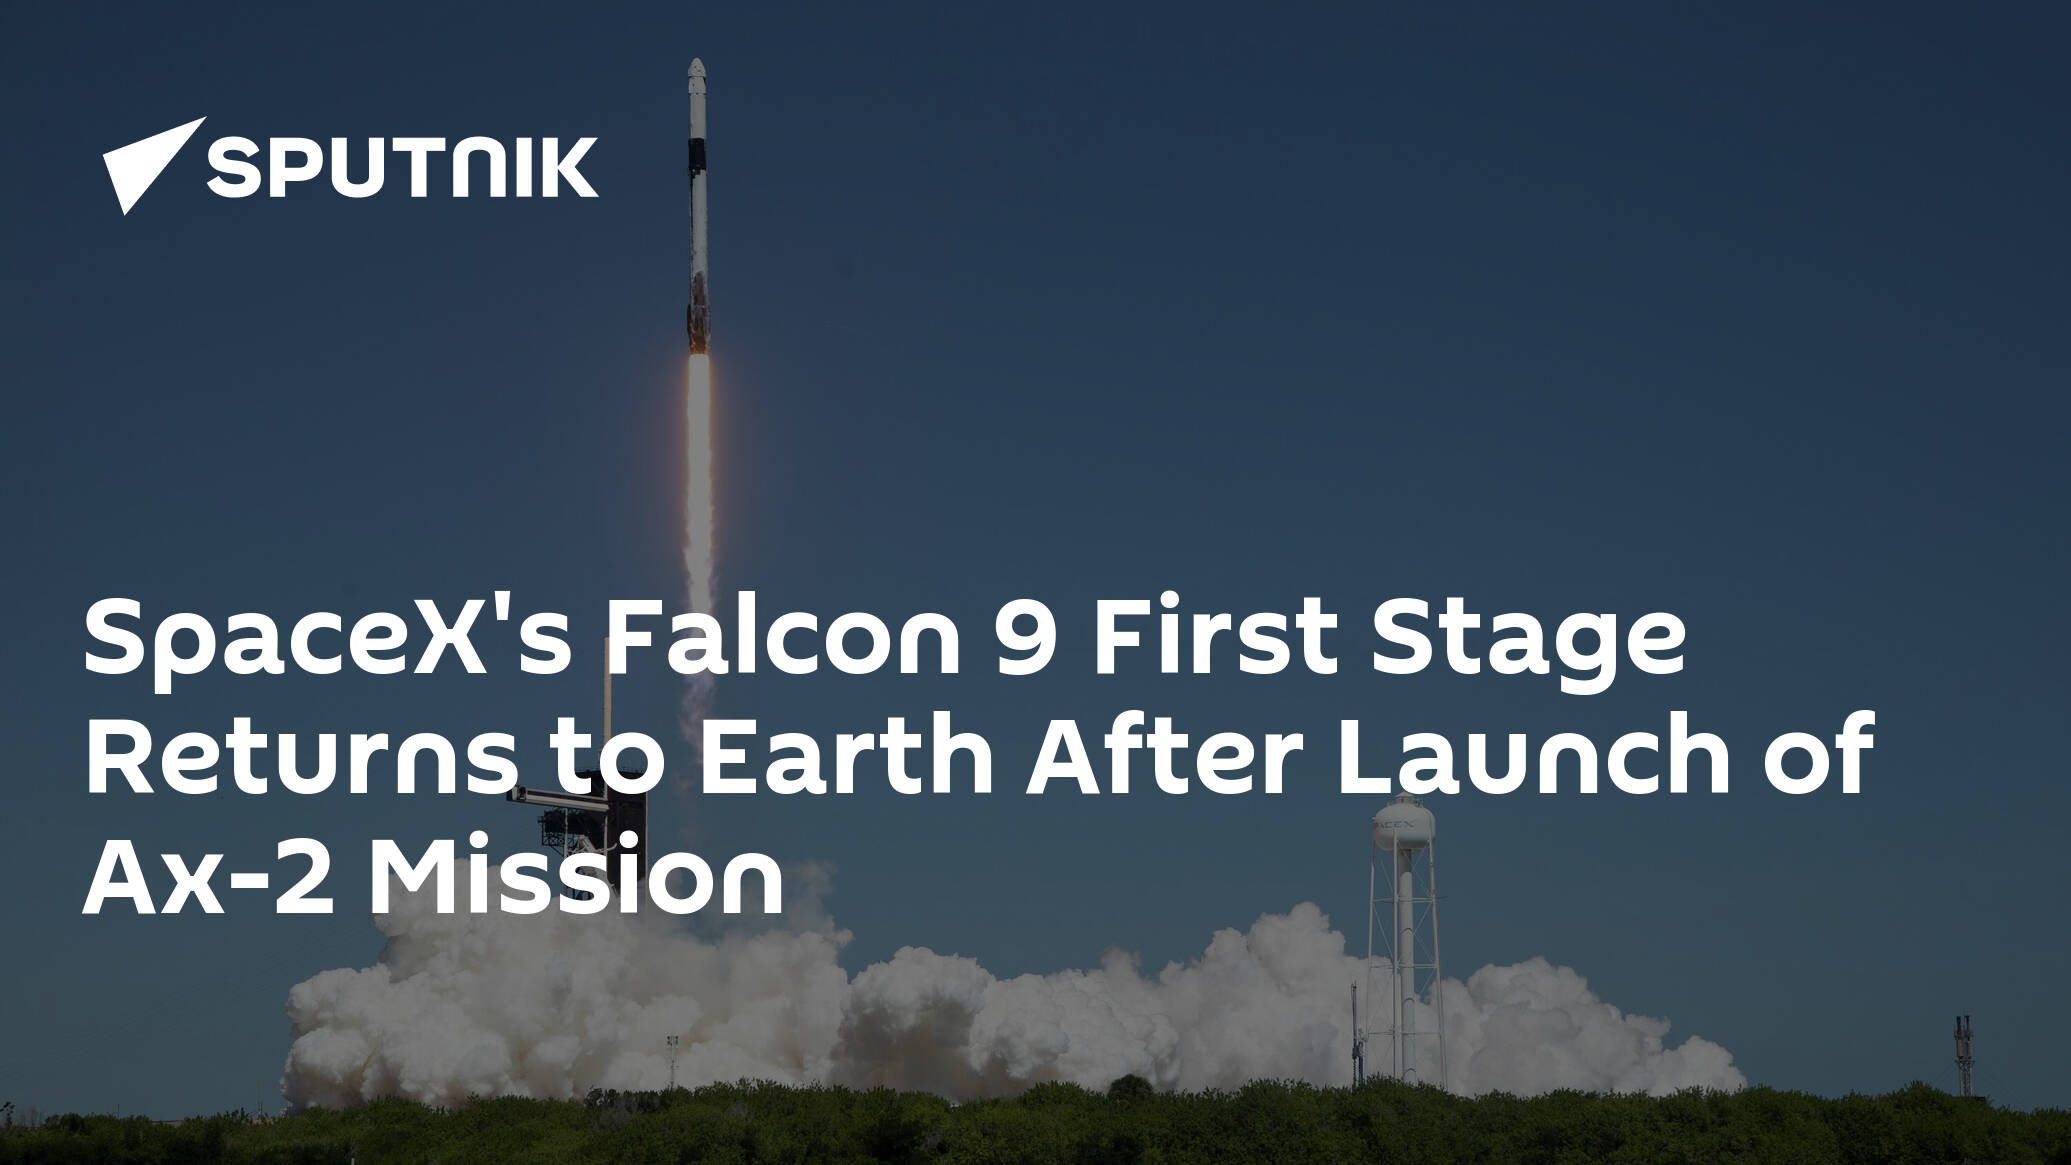 SpaceX's Falcon 9 First Stage Returns to Earth After Launch of Ax-2 Mission